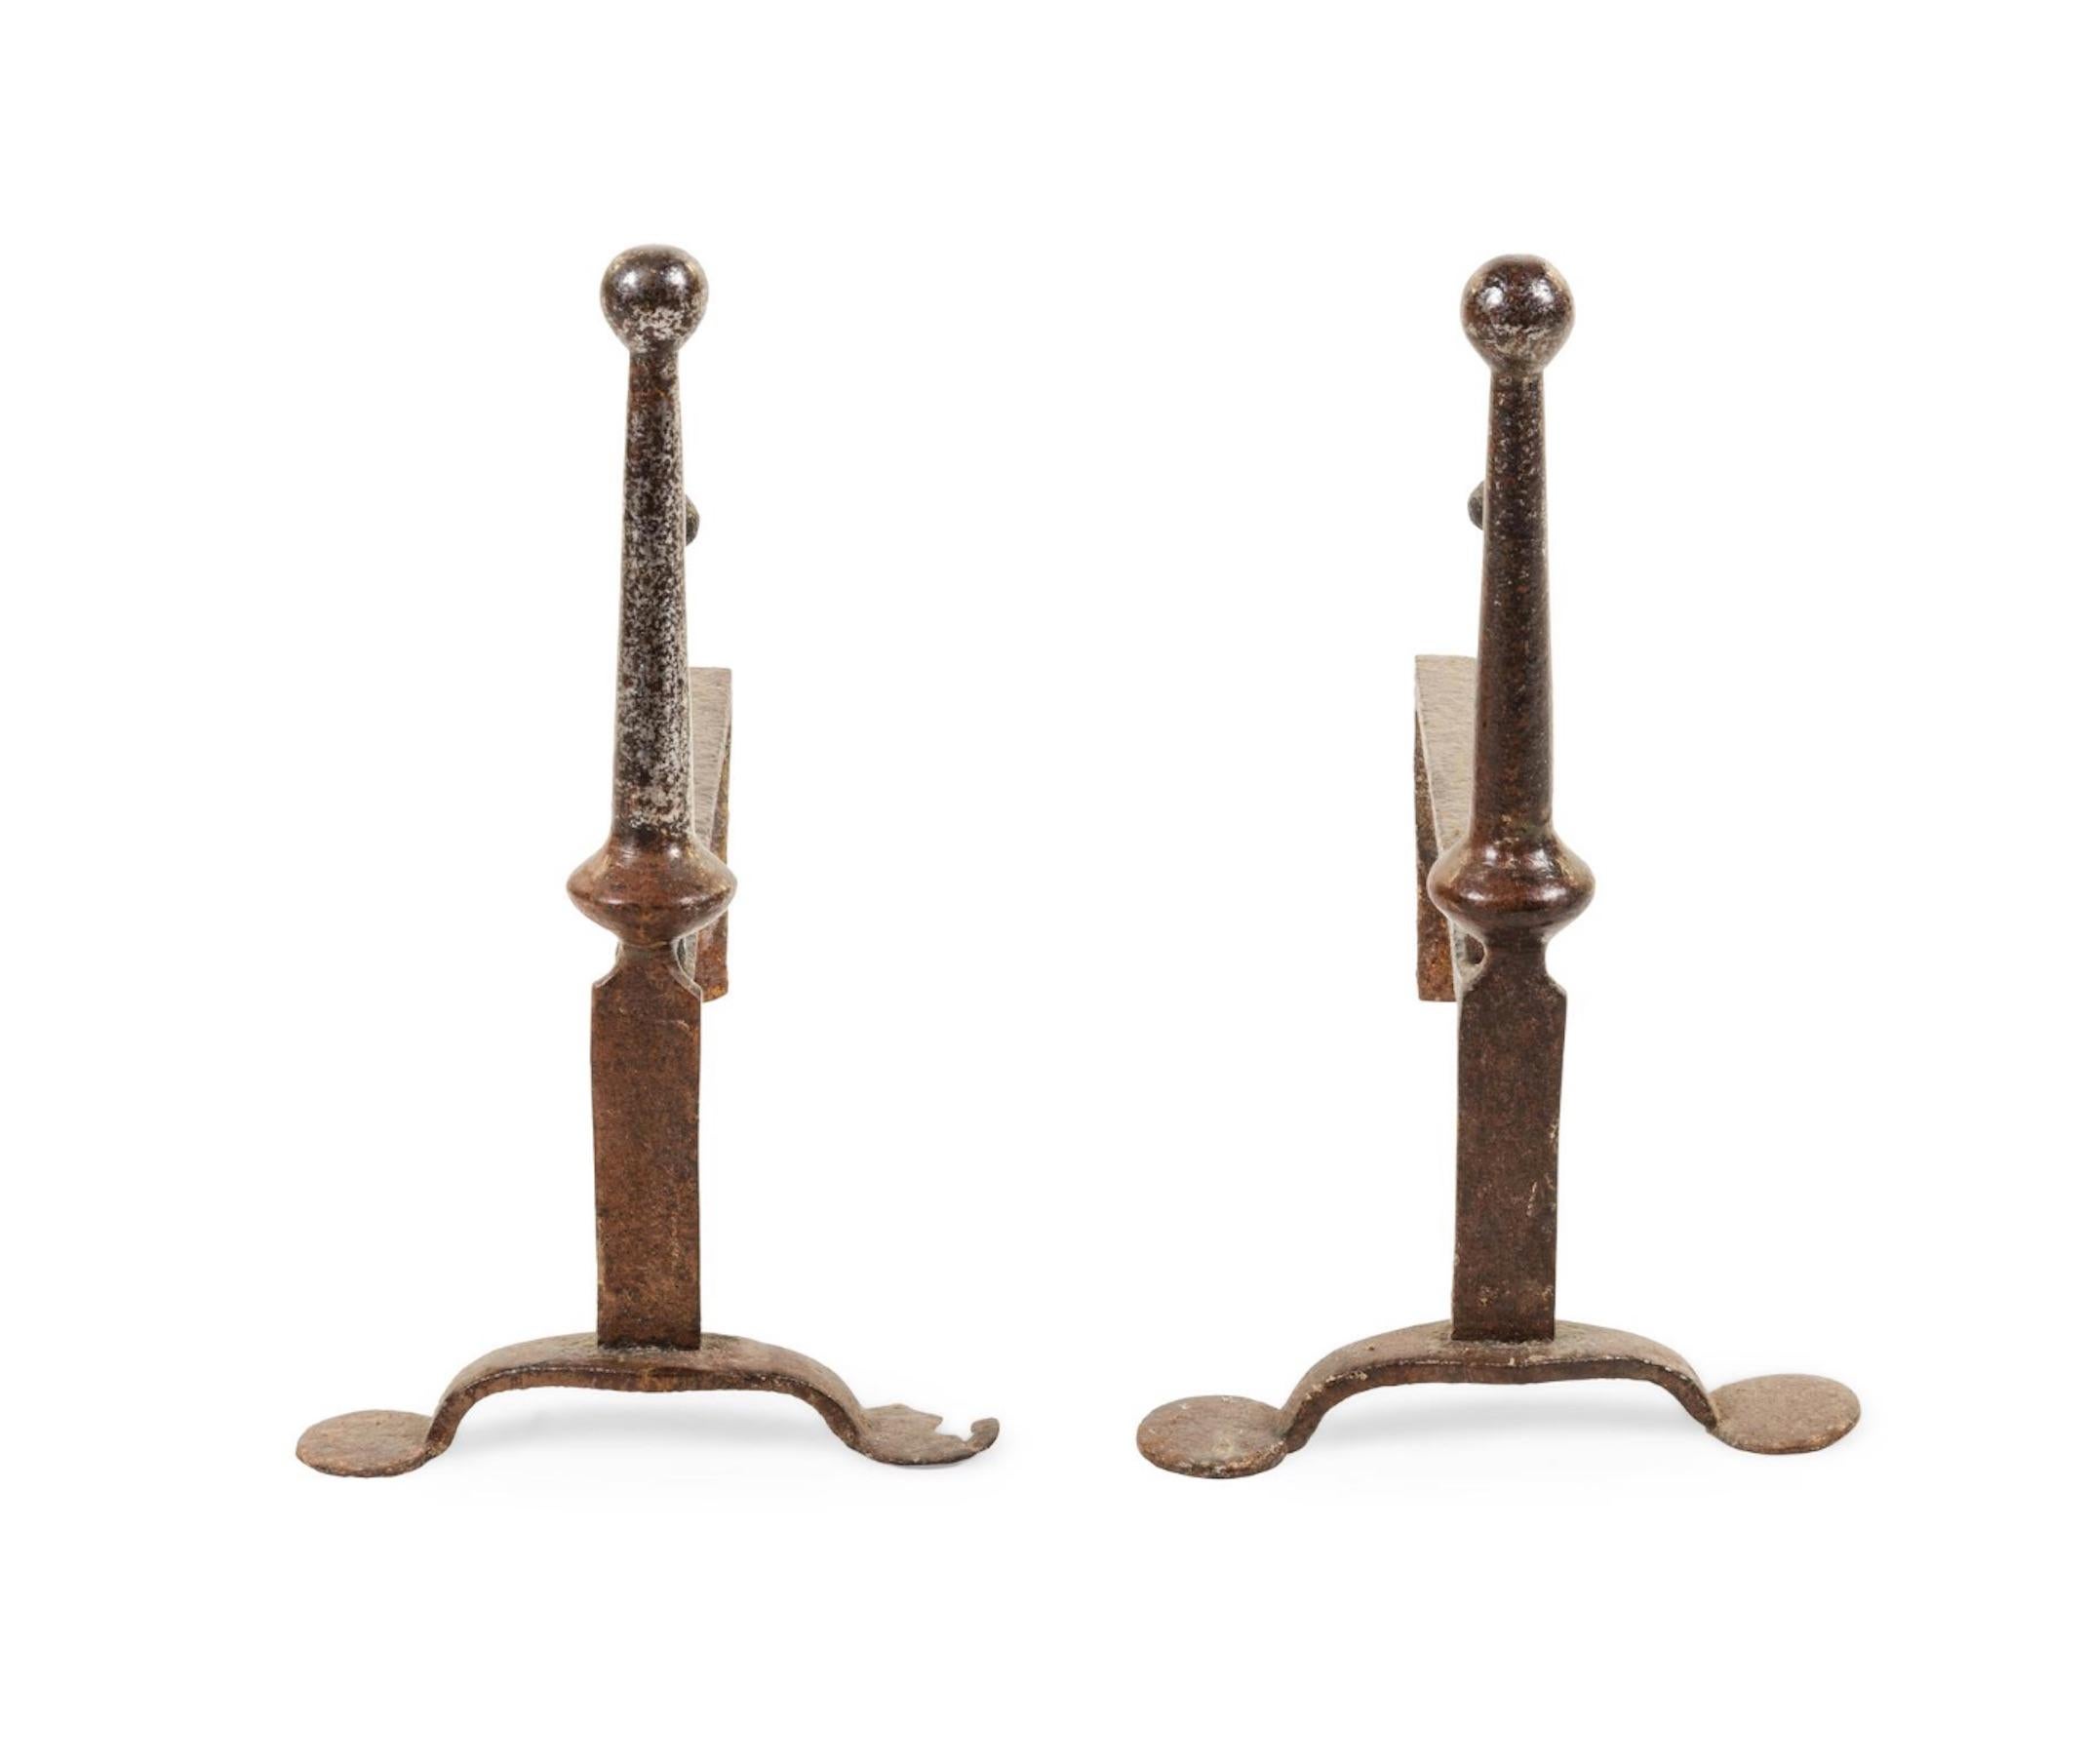 A pair of 19th century handwrought iron andirons in the style of Giacometti. Great contemporary form.
Measures: Height 15 x depth 17 inches.